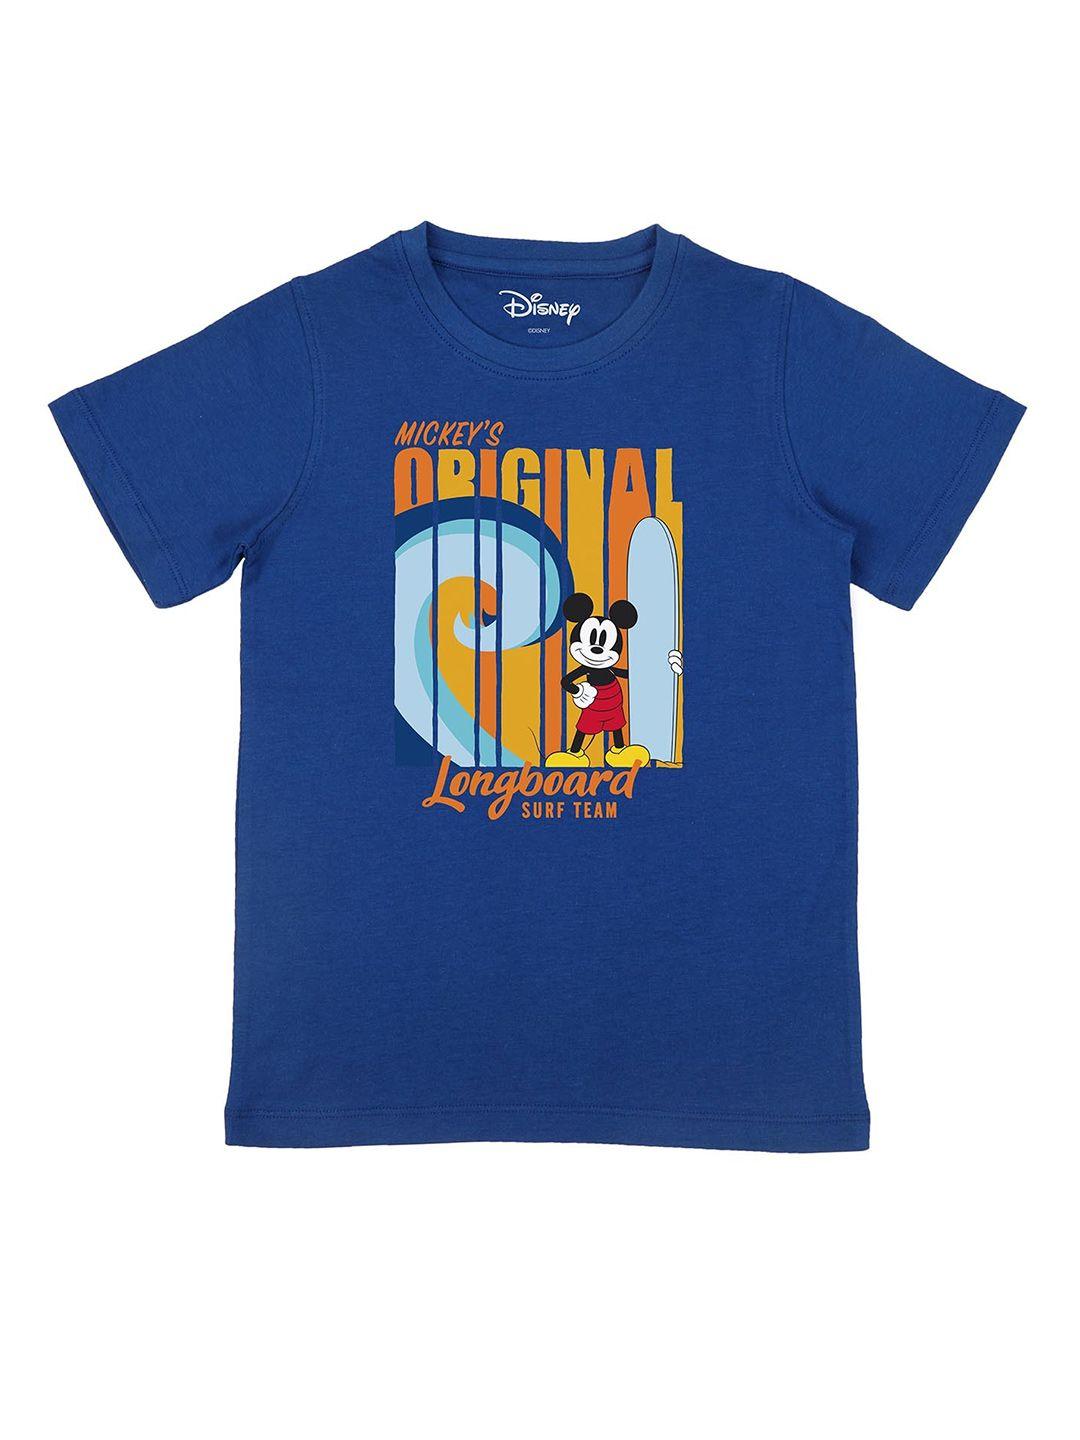 disney-by-wear-your-mind-boys-blue-printed-round-neck-cotton-t-shirt